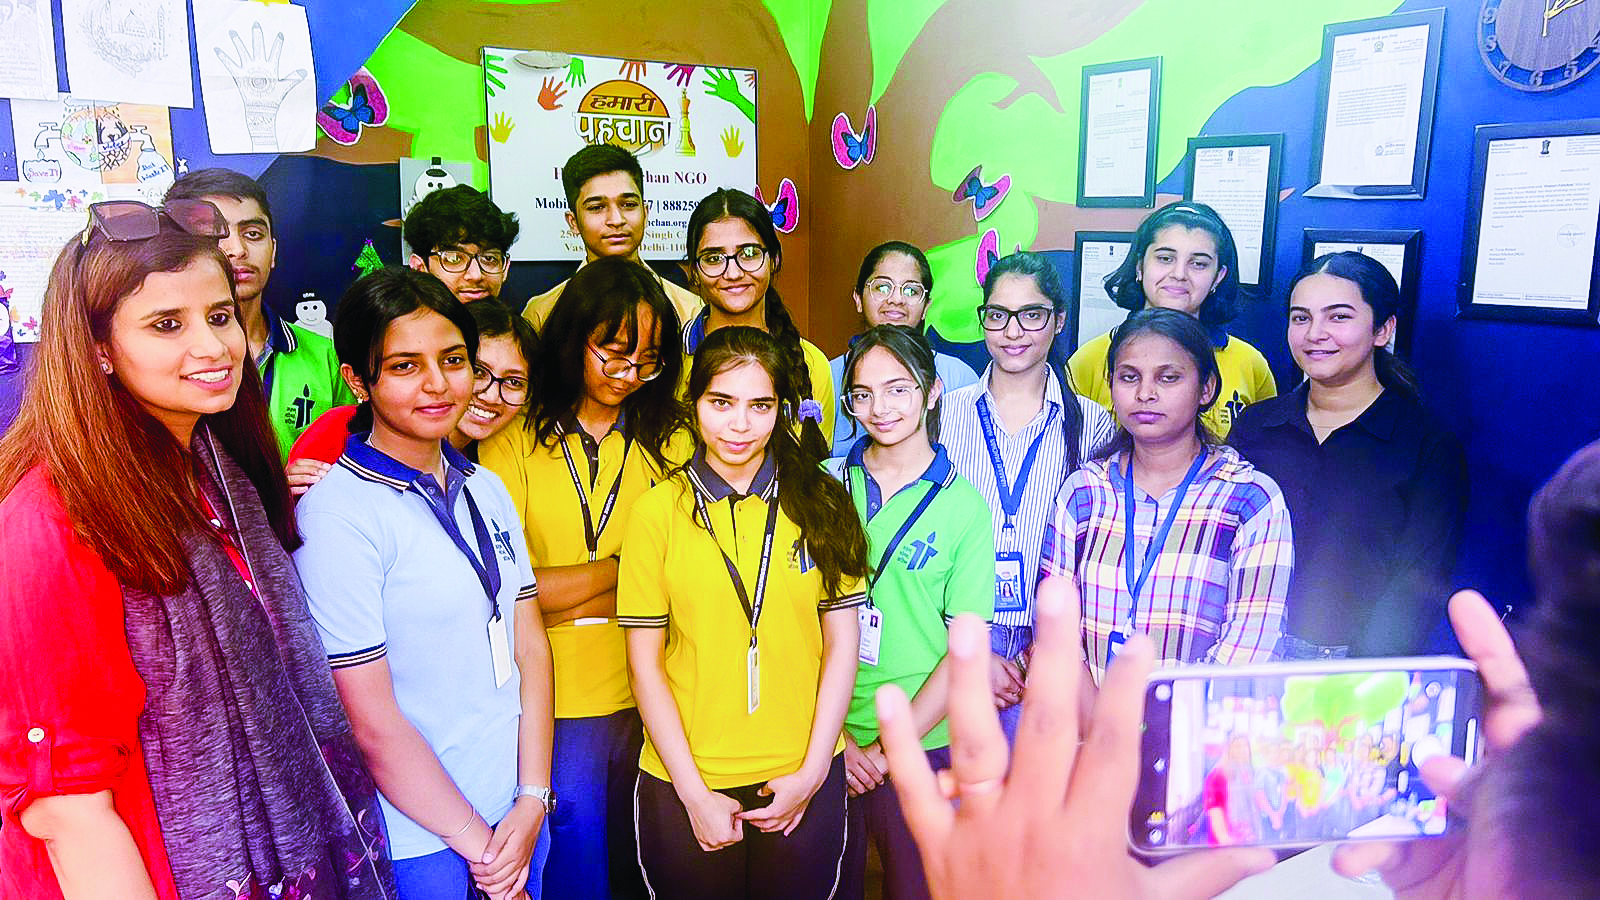 VAR SINGH CAMP: INTERACT CLUBS DONATION DRIVE